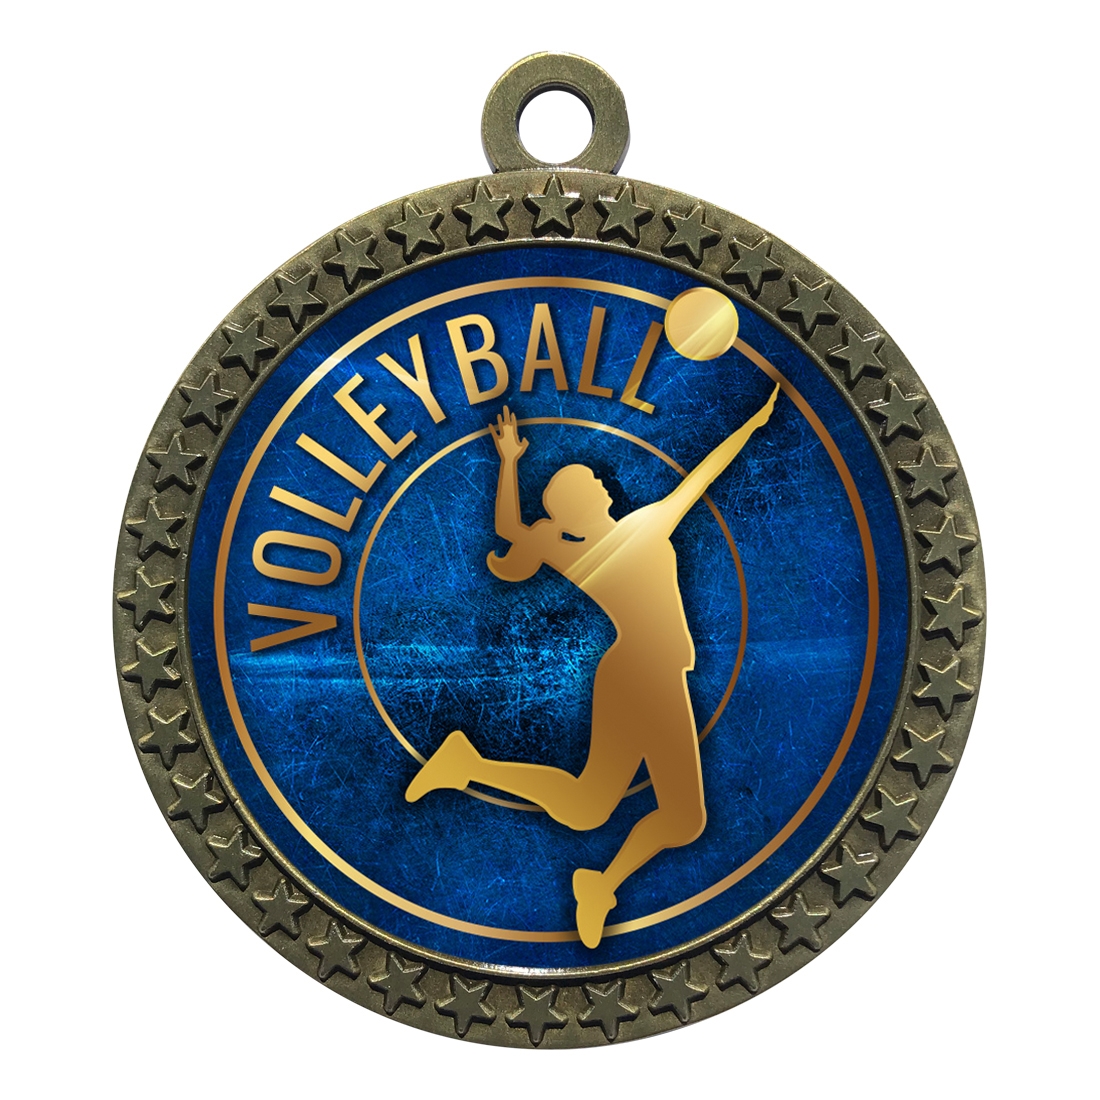 Volleyball Medal w/ Red-White-Blue Ribbon - Volleyball Jewelry, Keychains,  Medals, etc.